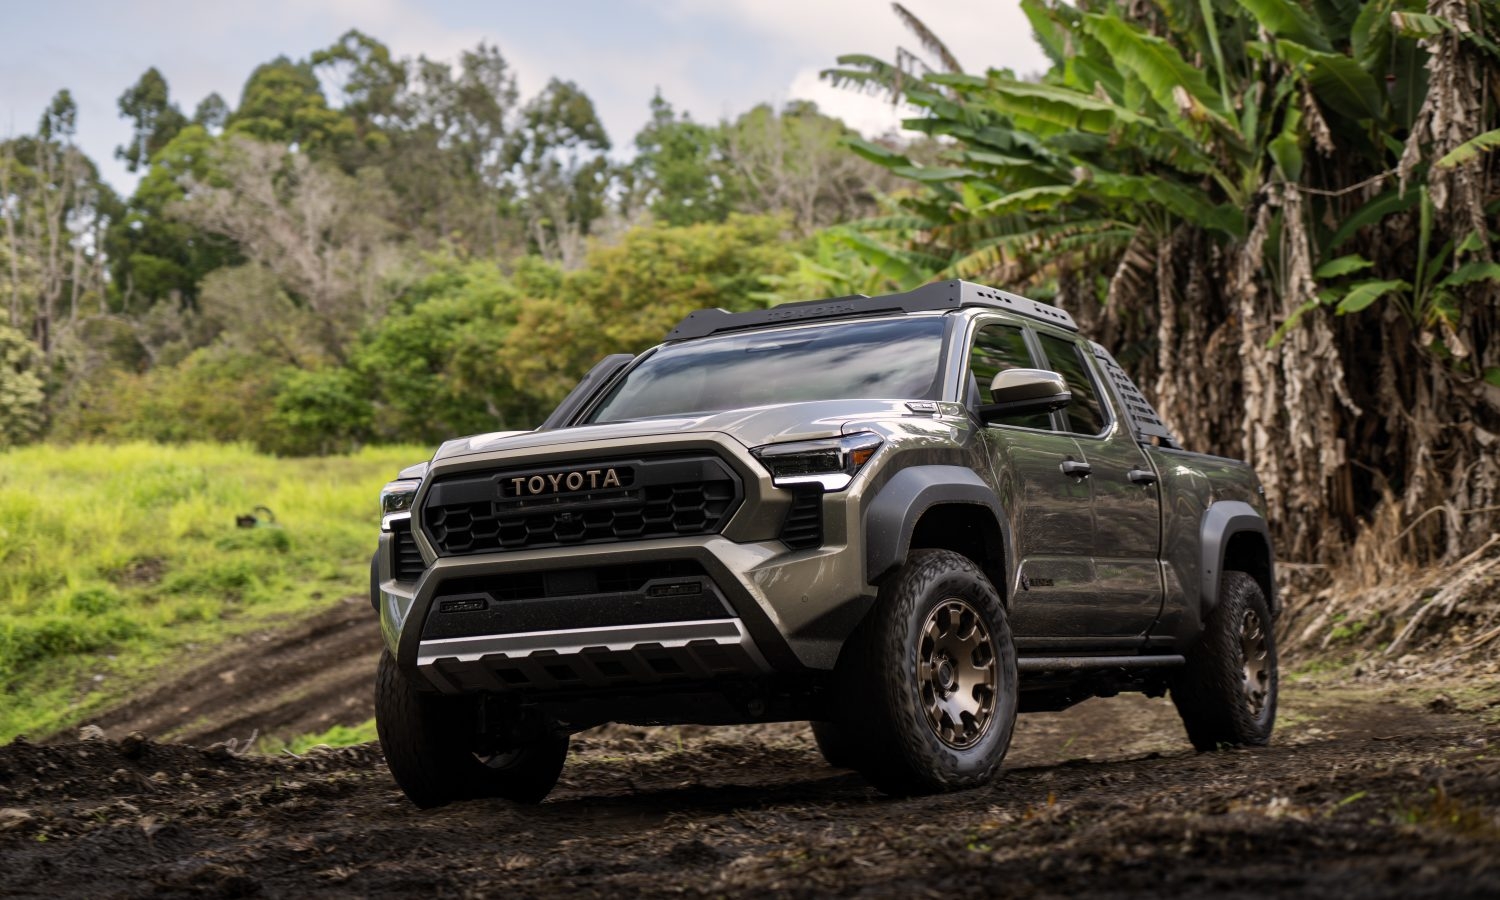 The New Toyota Tacoma Unveiled: Luxury Meets Off-Road Ruggedness